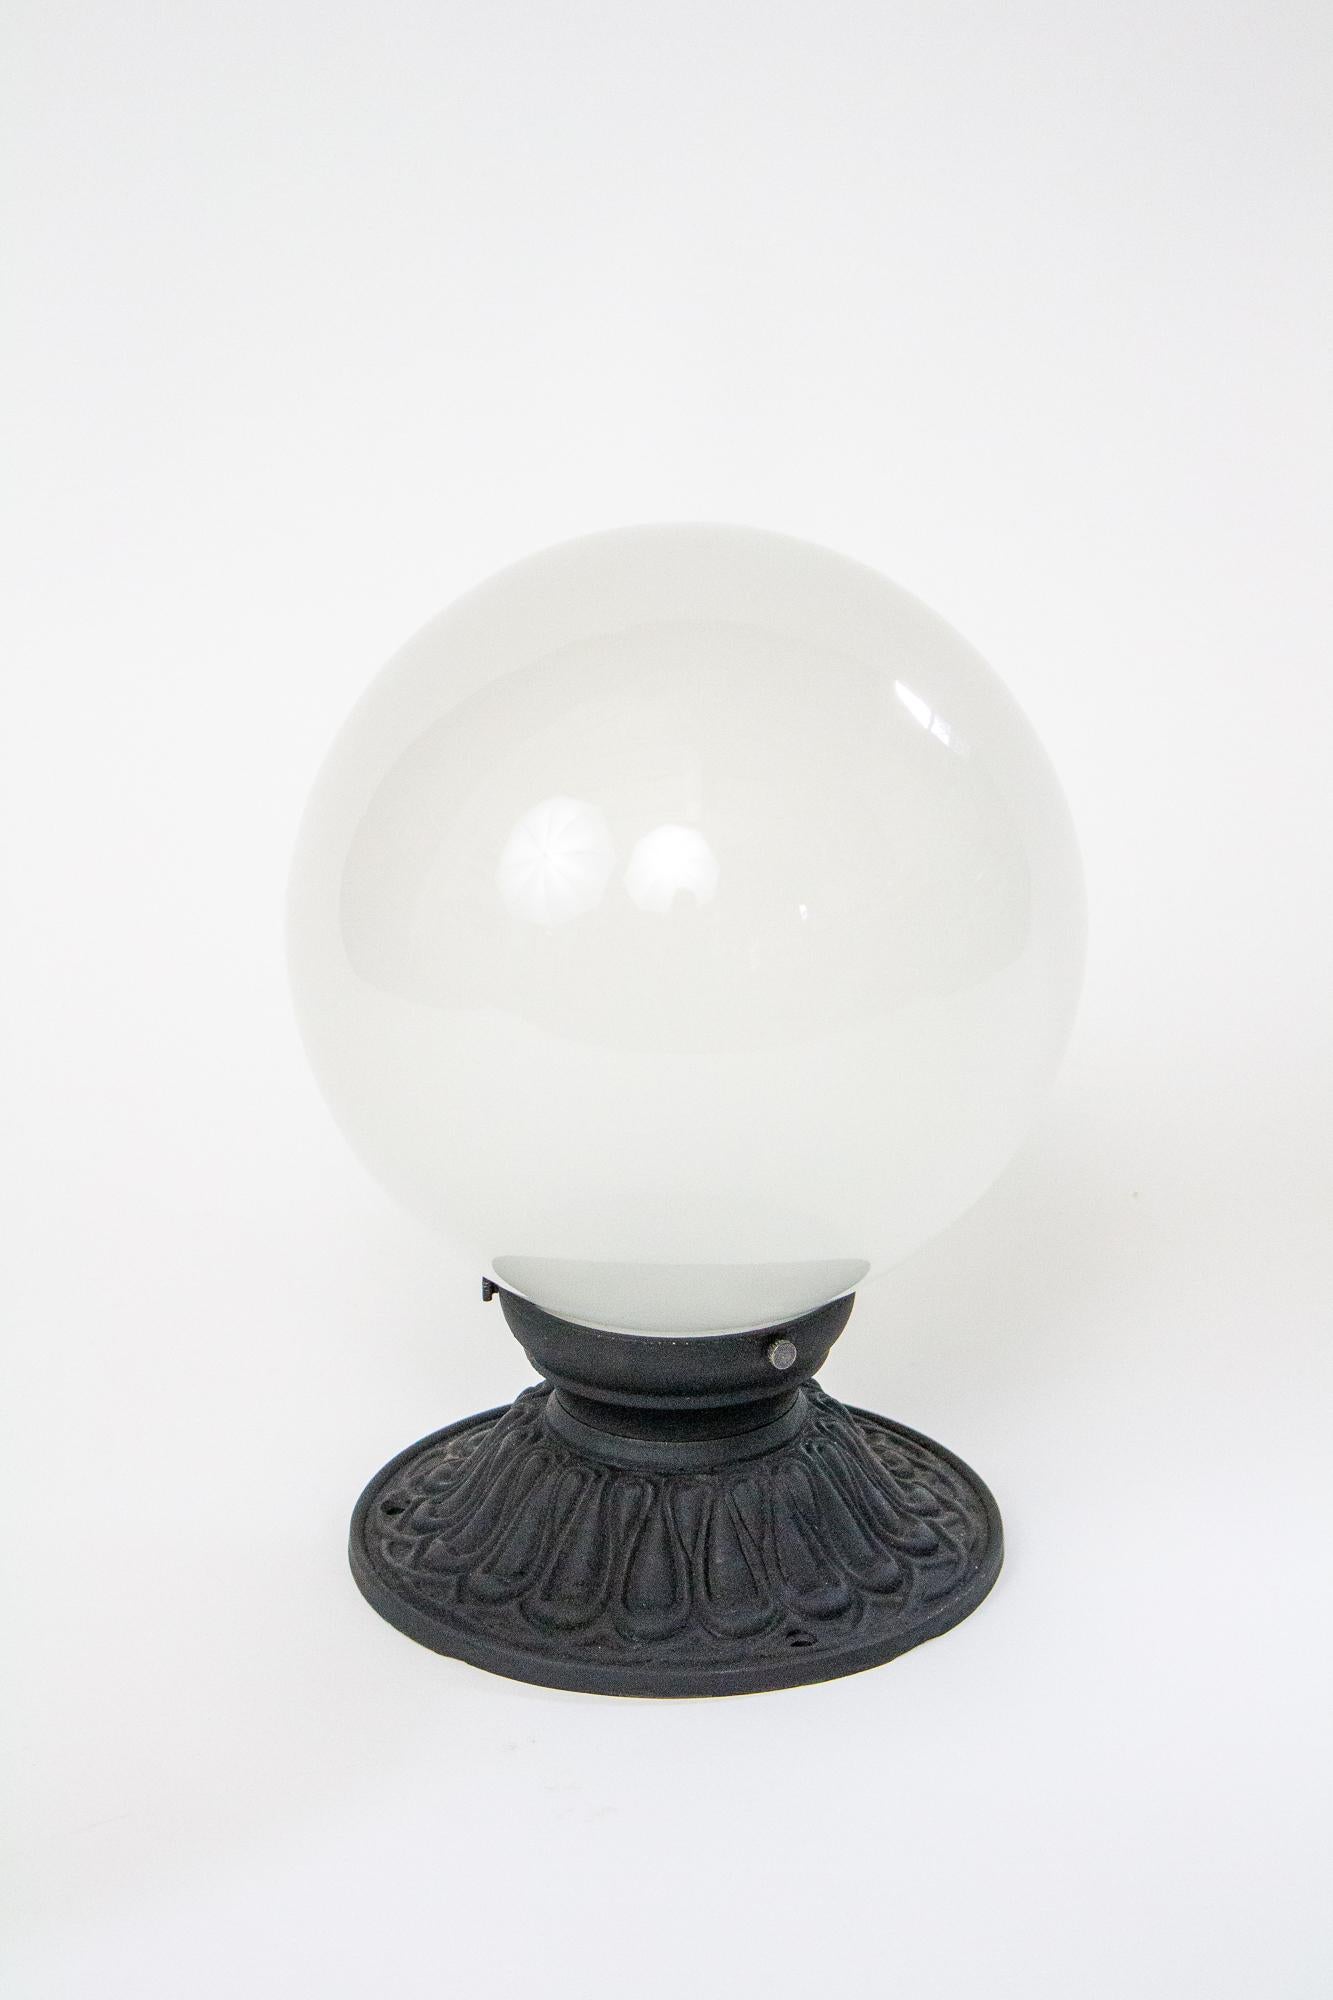 Classic porch light. Cast iron base with scalloped details, painted in a matte black. Single porcelain socket. Interior sandblasted hand blown glass globe. New, made in the same fashion as pieces made in the early 20th century. Max wattage 150W.